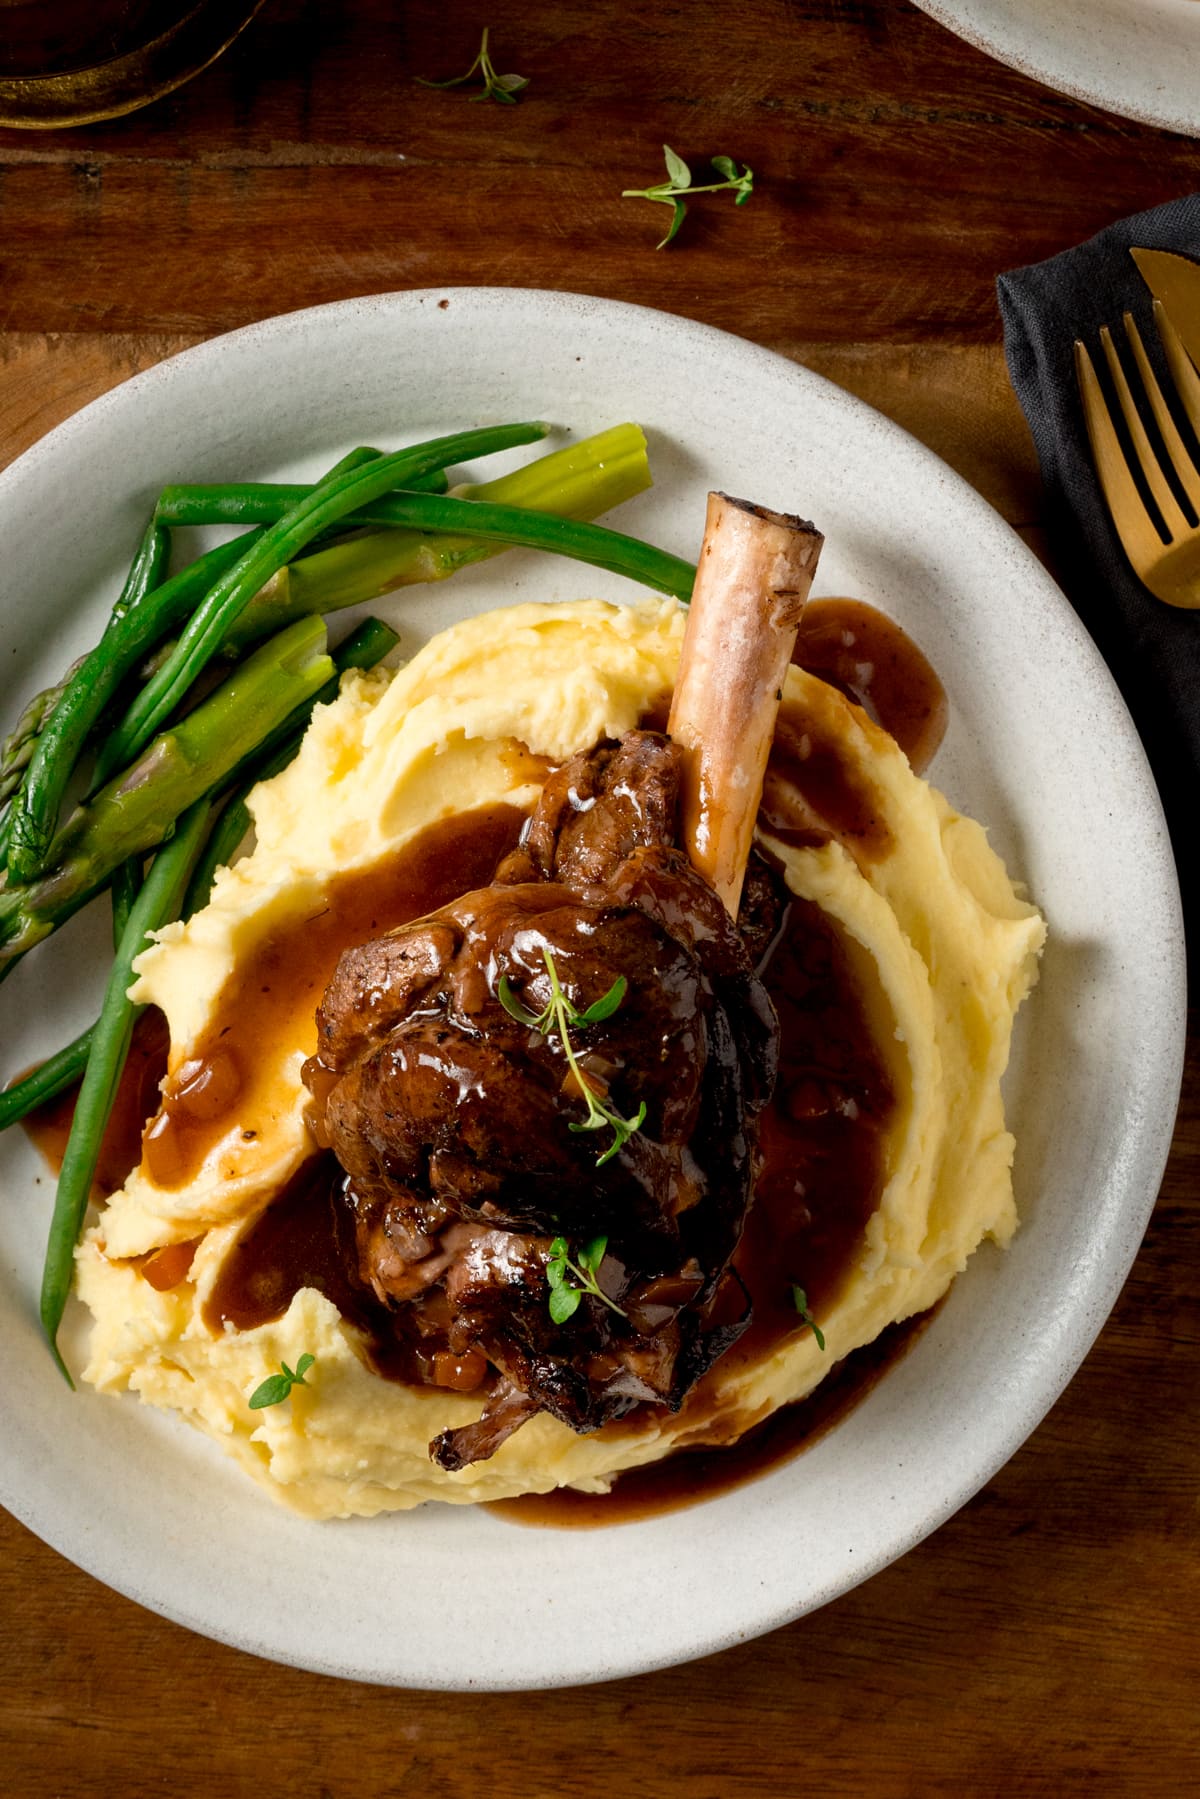 Slow cooked lamb shank on a pile of mashed potato with green beans and asparagus on a white plate. There is gravy and sprigs of fresh thyme on the lamb shank. The plate is on a wooden table.